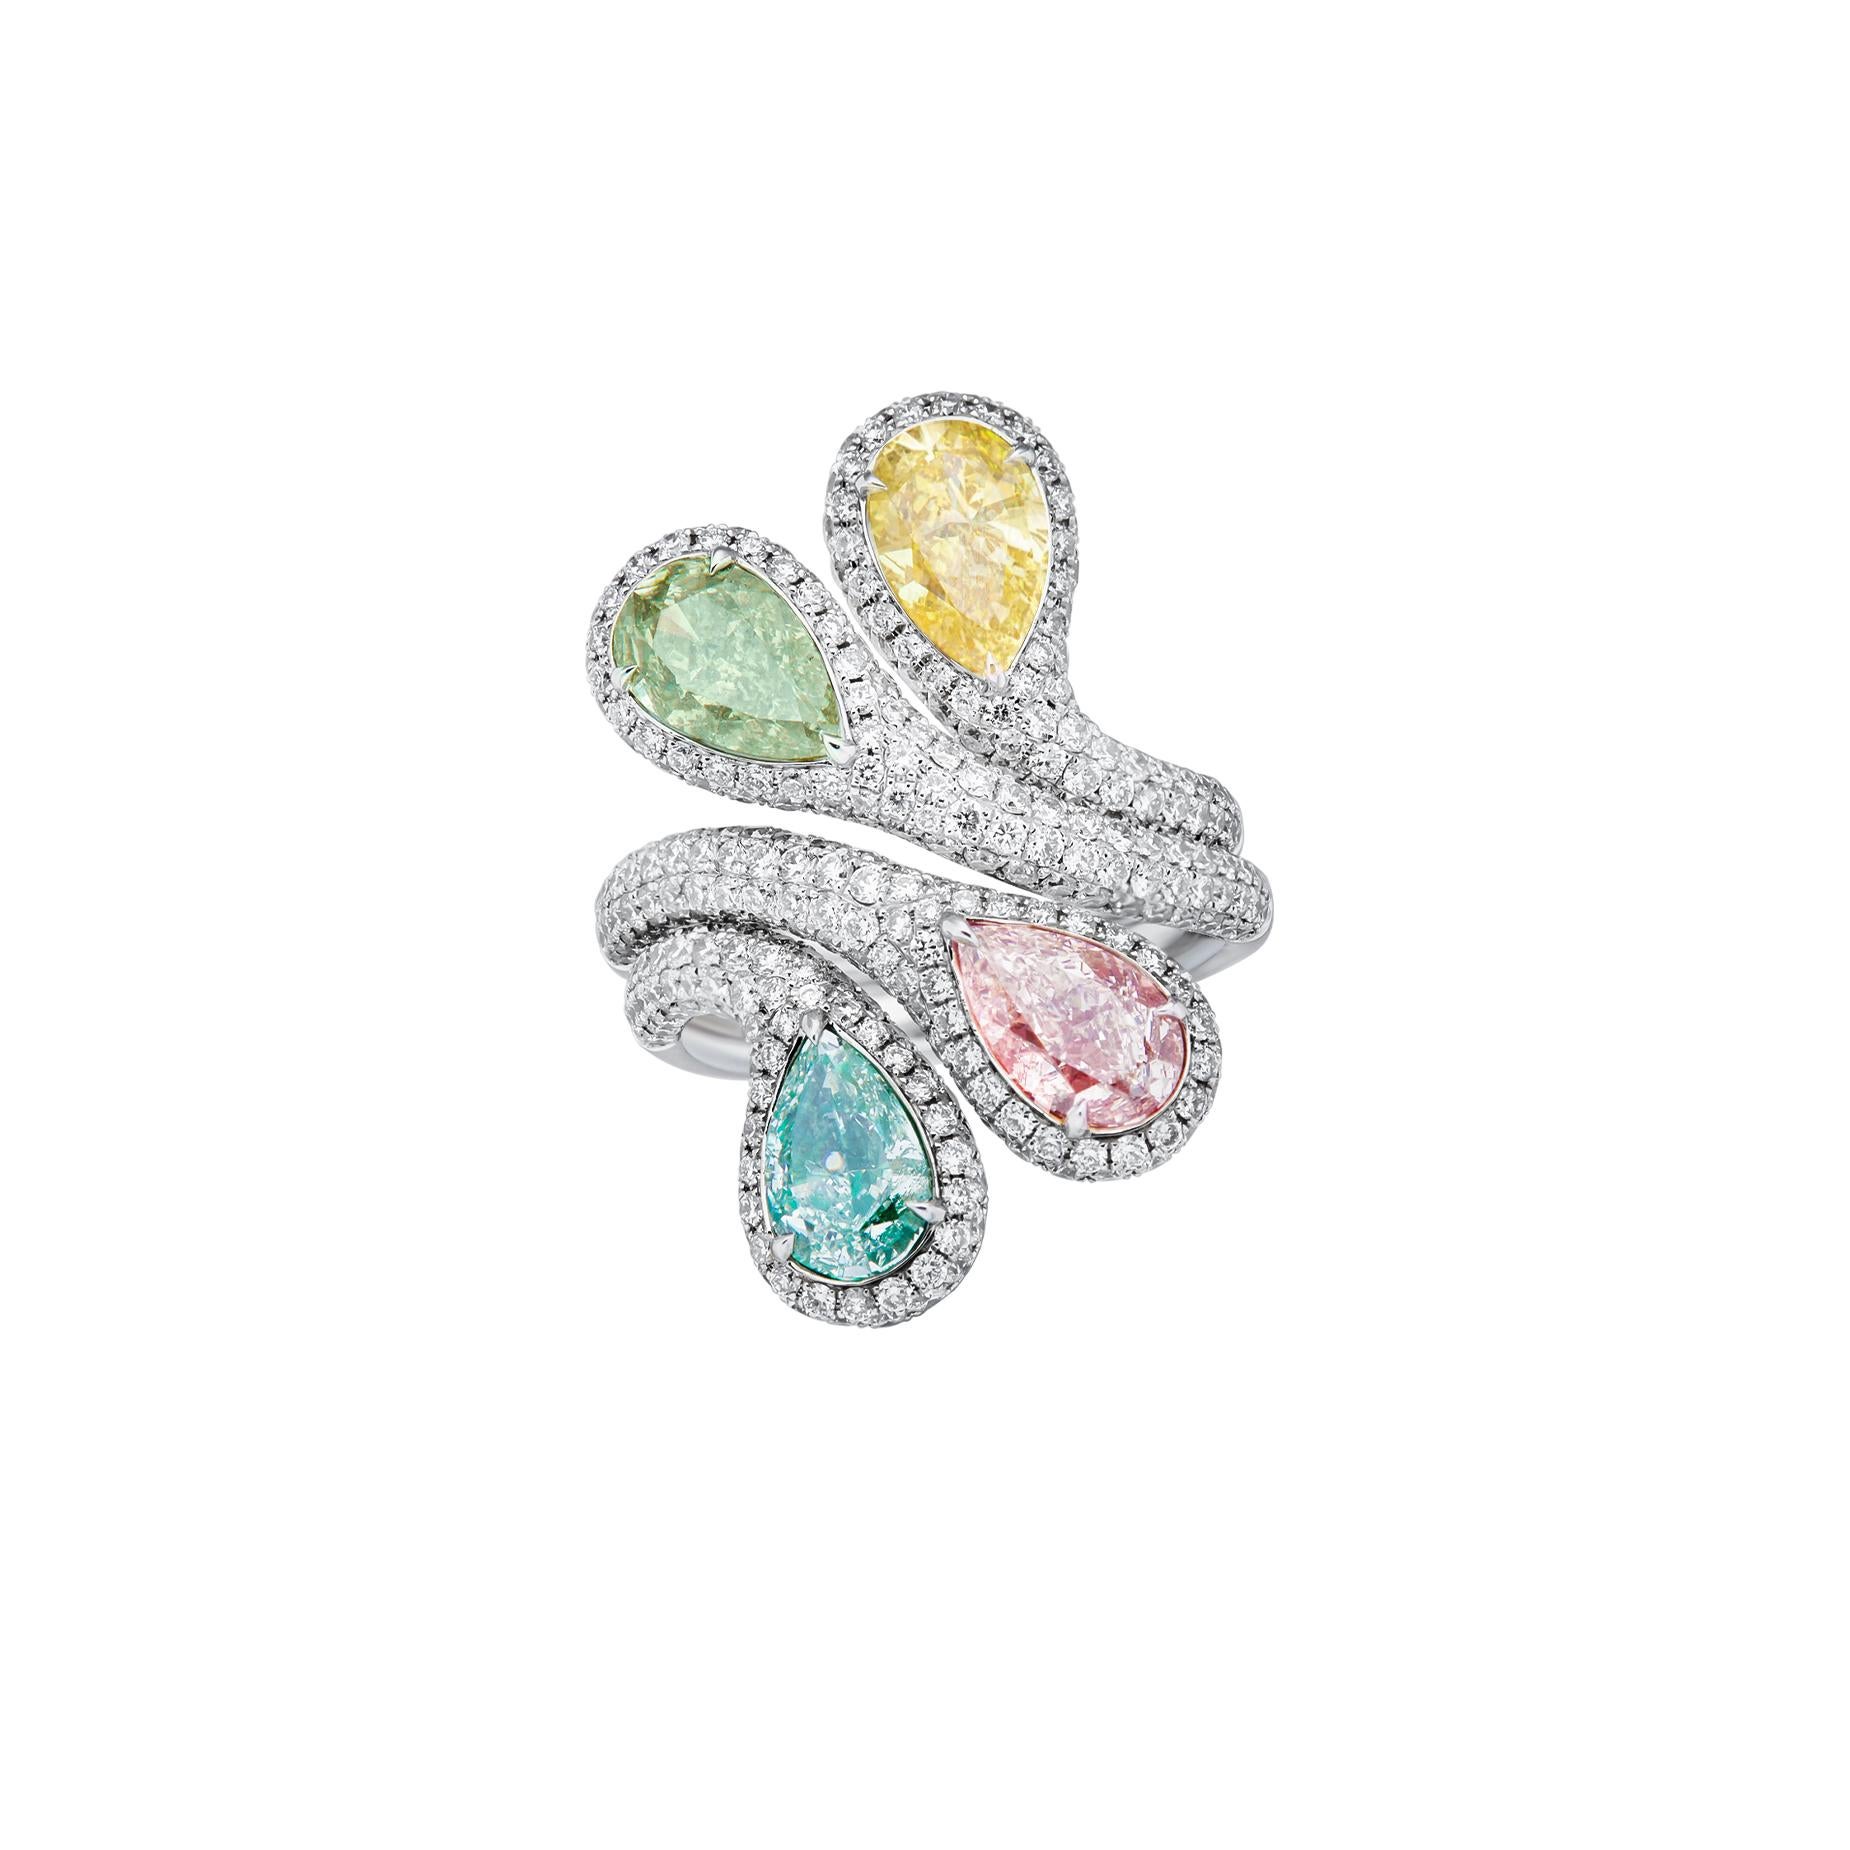 The Elegance of Nature's Palette: A Harmonious Symphony of Colors in One Exquisite Ring

Introducing our masterpiece, an enchanting natural fancy color diamond ring that transcends beauty itself. Crafted with meticulous attention to detail and an